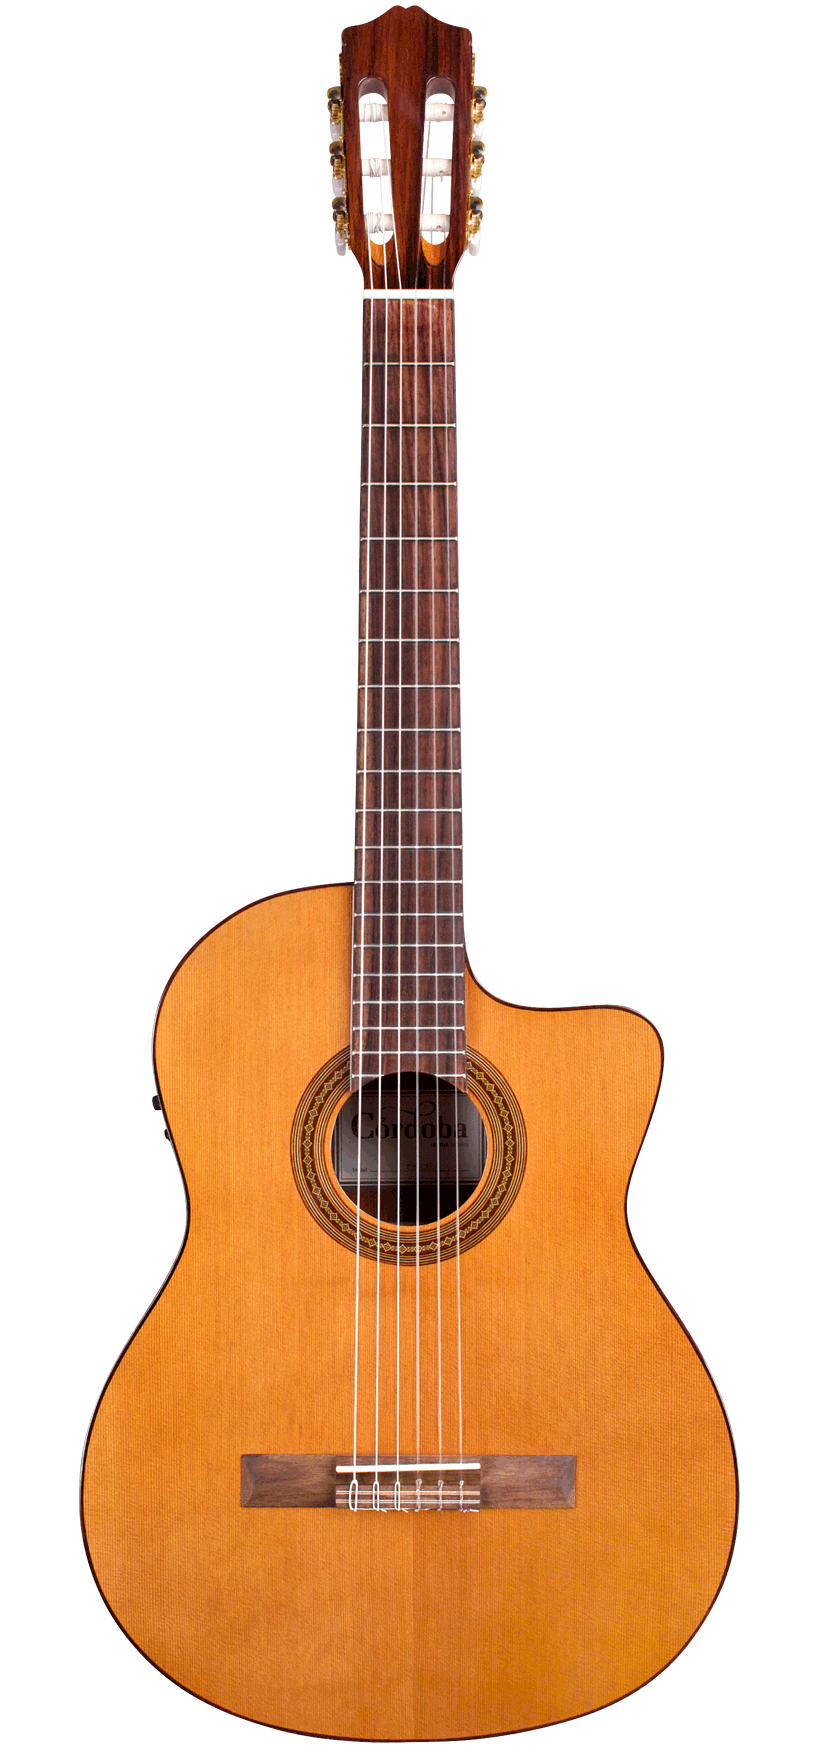 Nylon-String Classical Guitar Background PNG Image